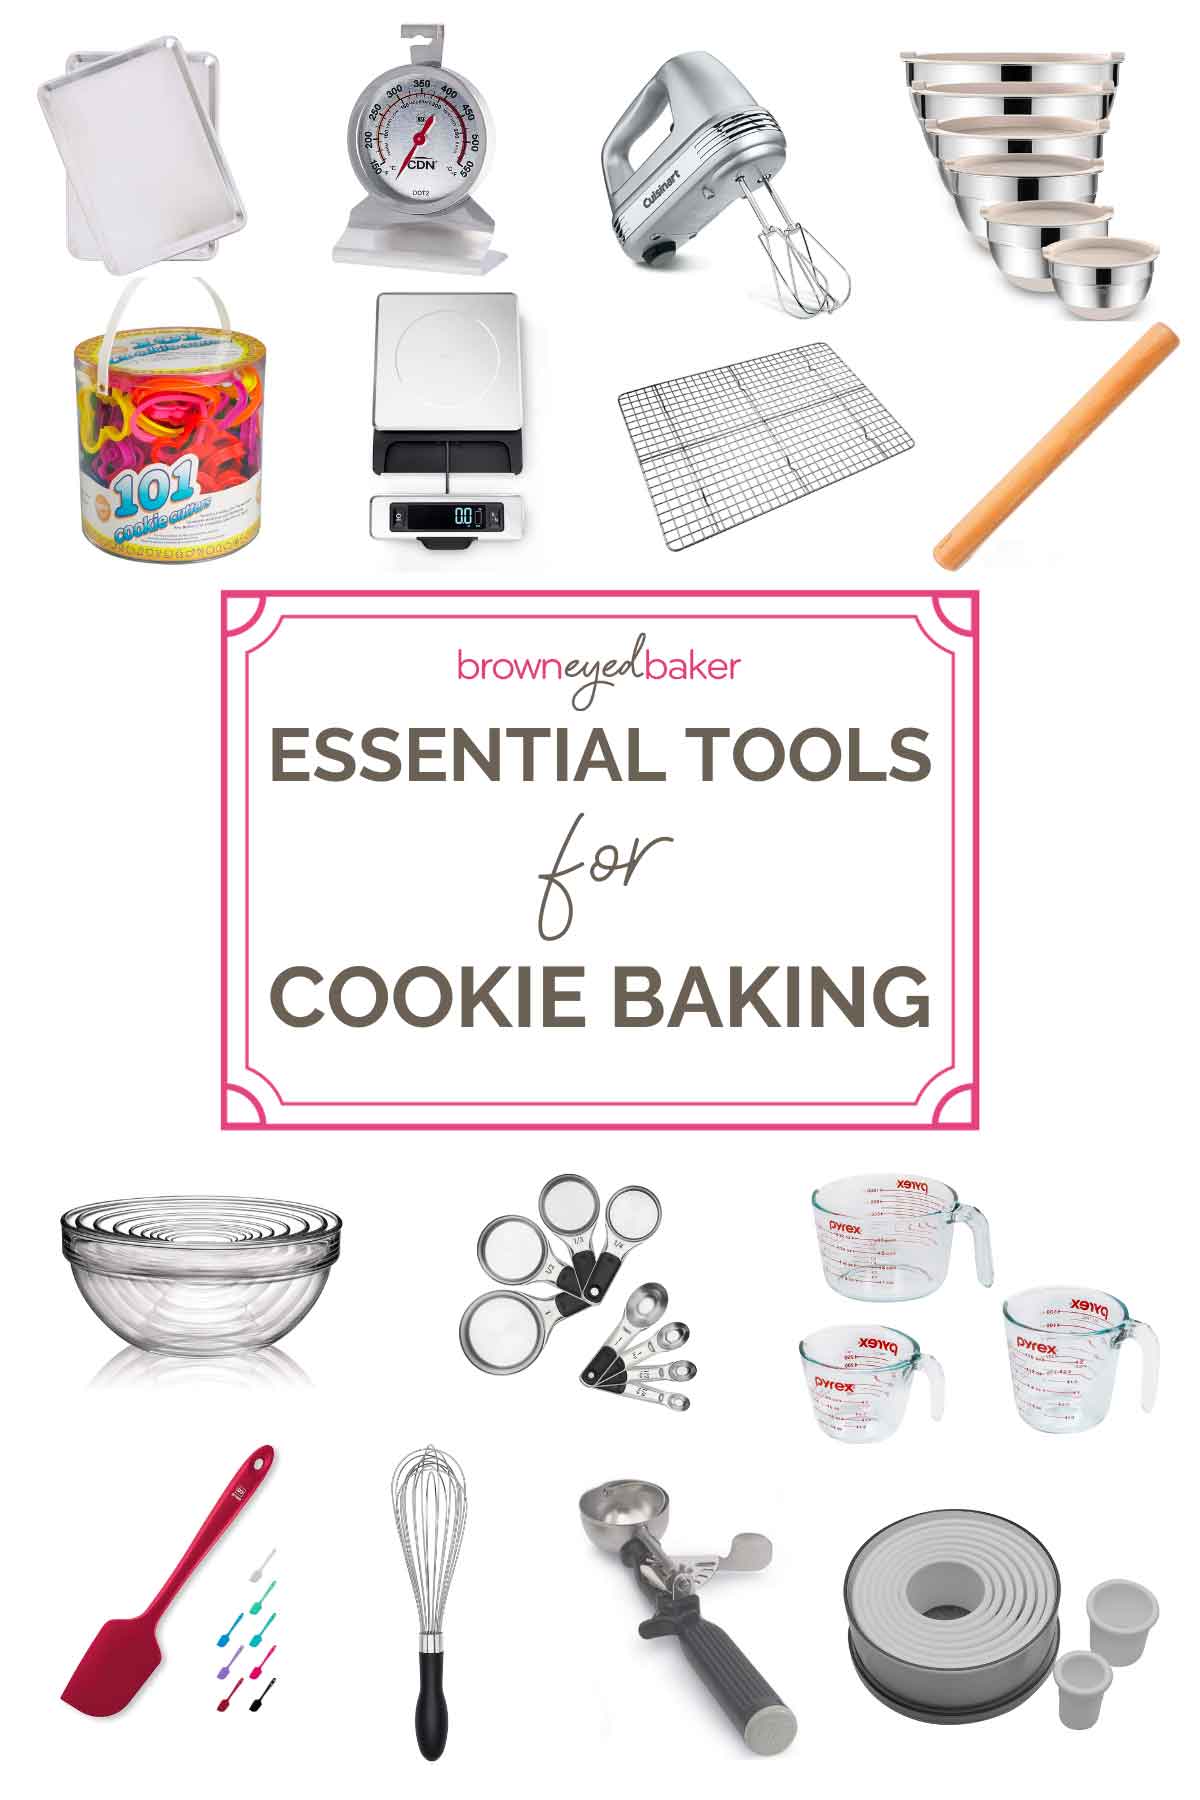 Photo collage of baking tools with text in center surrounded by pink frame "Essential Tools for Cookie Baking".